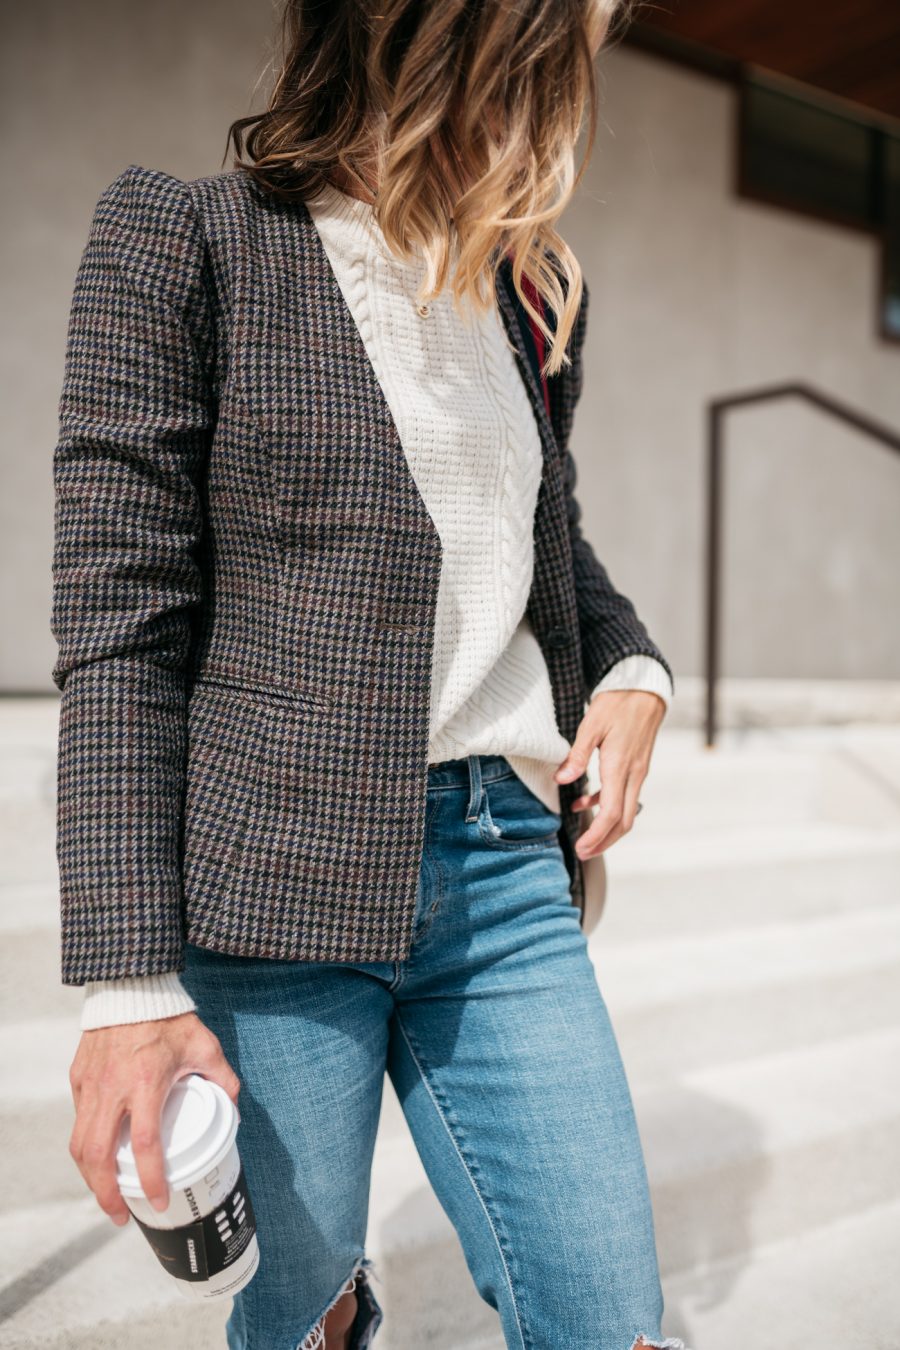 Fall style, plaid blazer, sweater, mom jeans, and booties